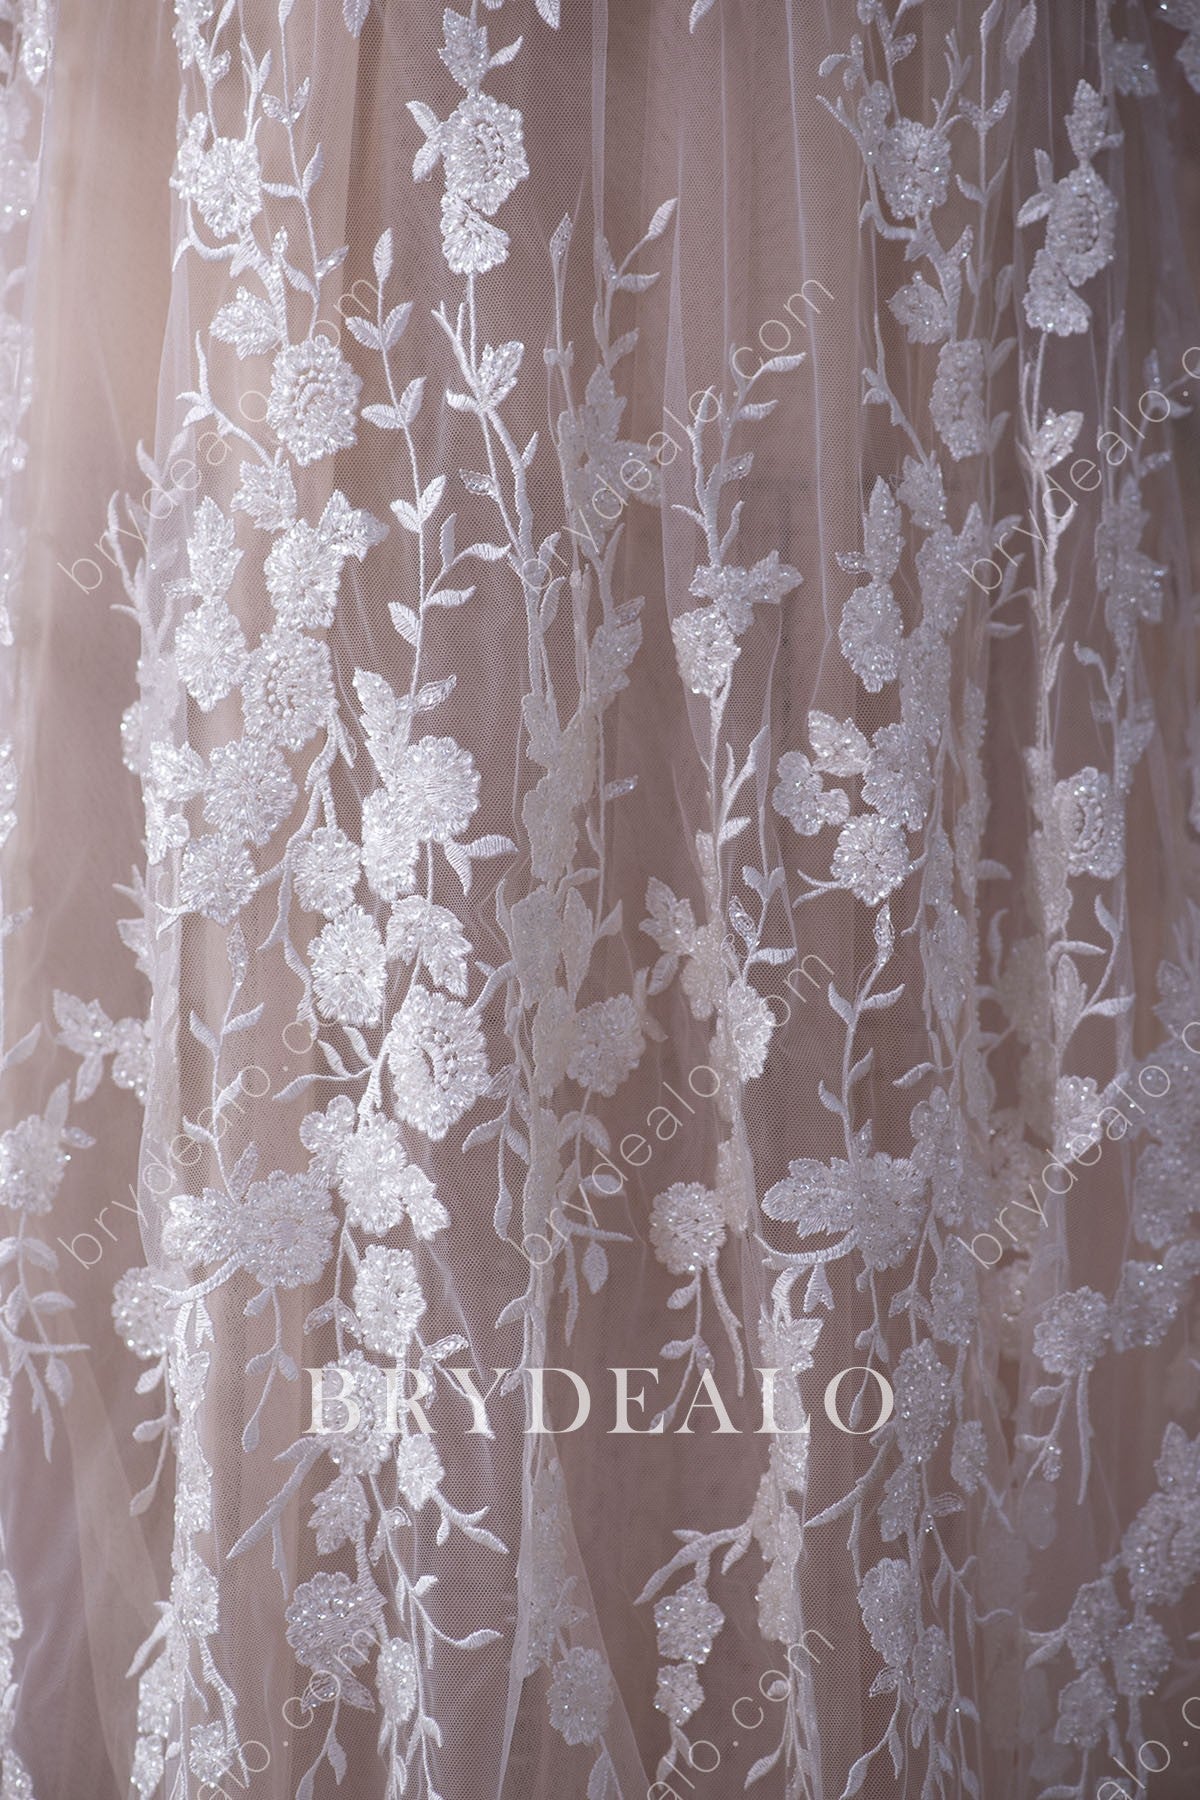 Best Beaded Floral Leafy Bridal Lace Fabric